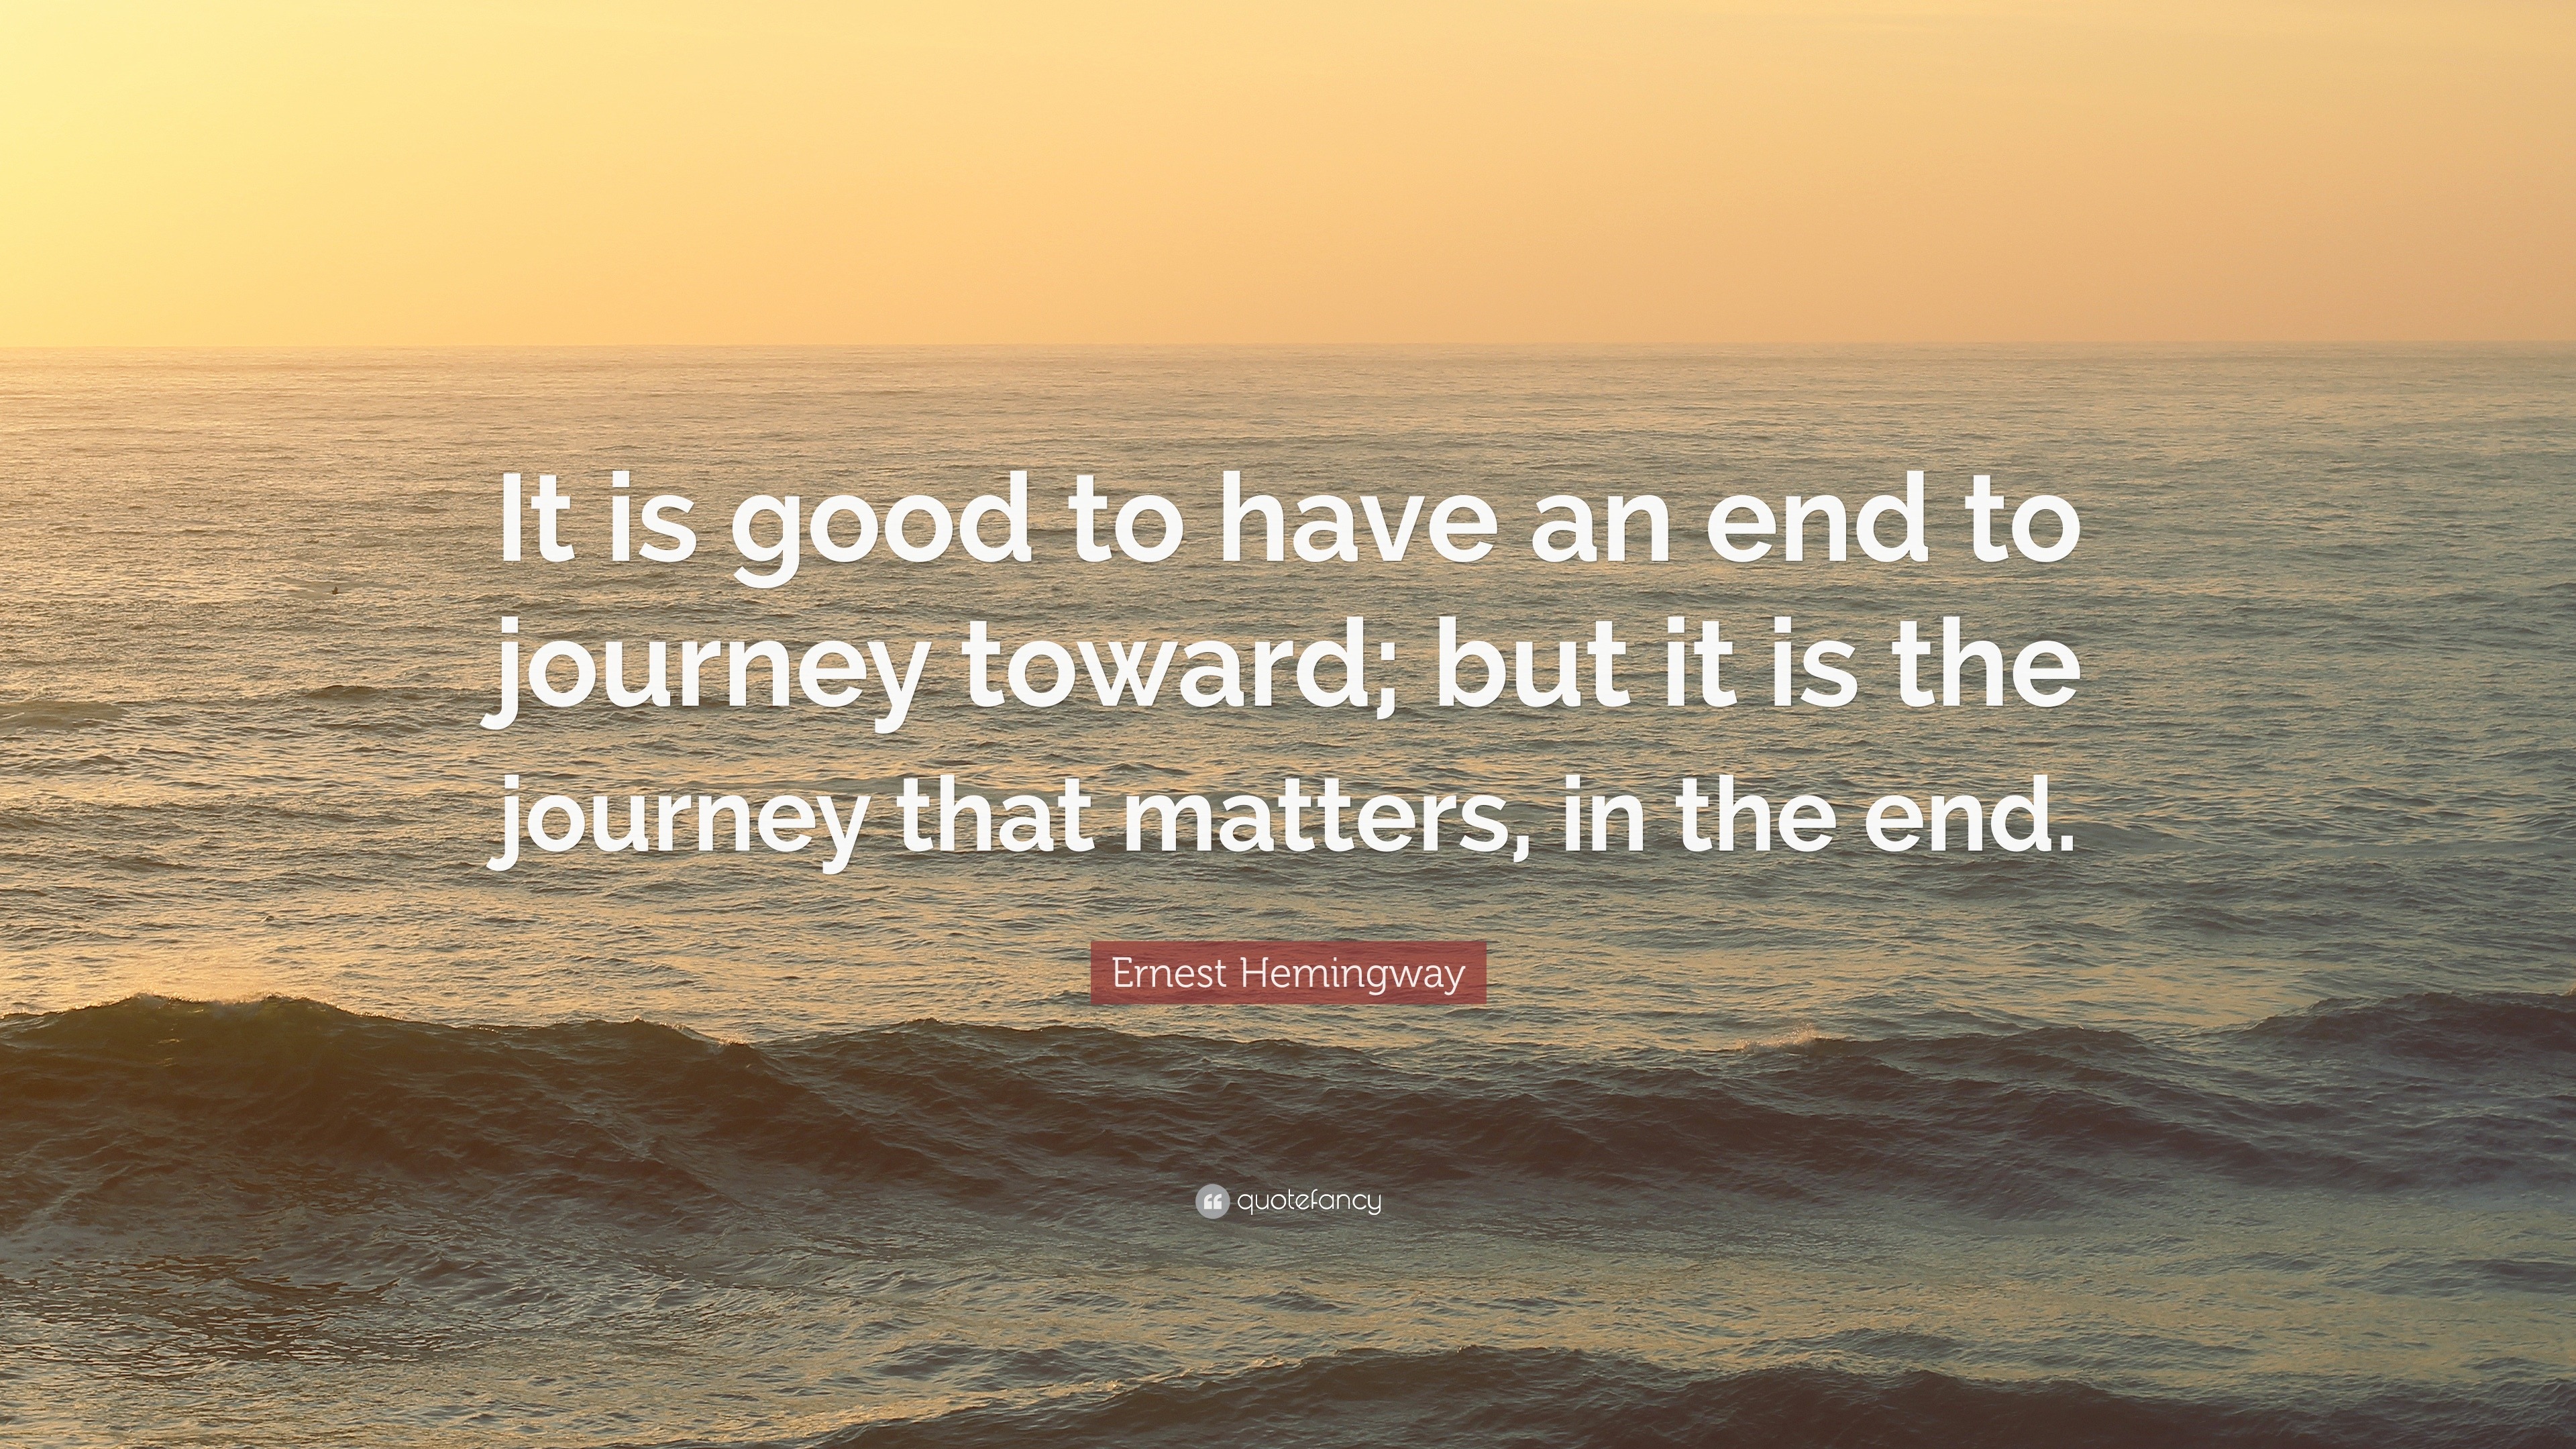 Ernest Hemingway Quote “It is good to have an end to journey toward